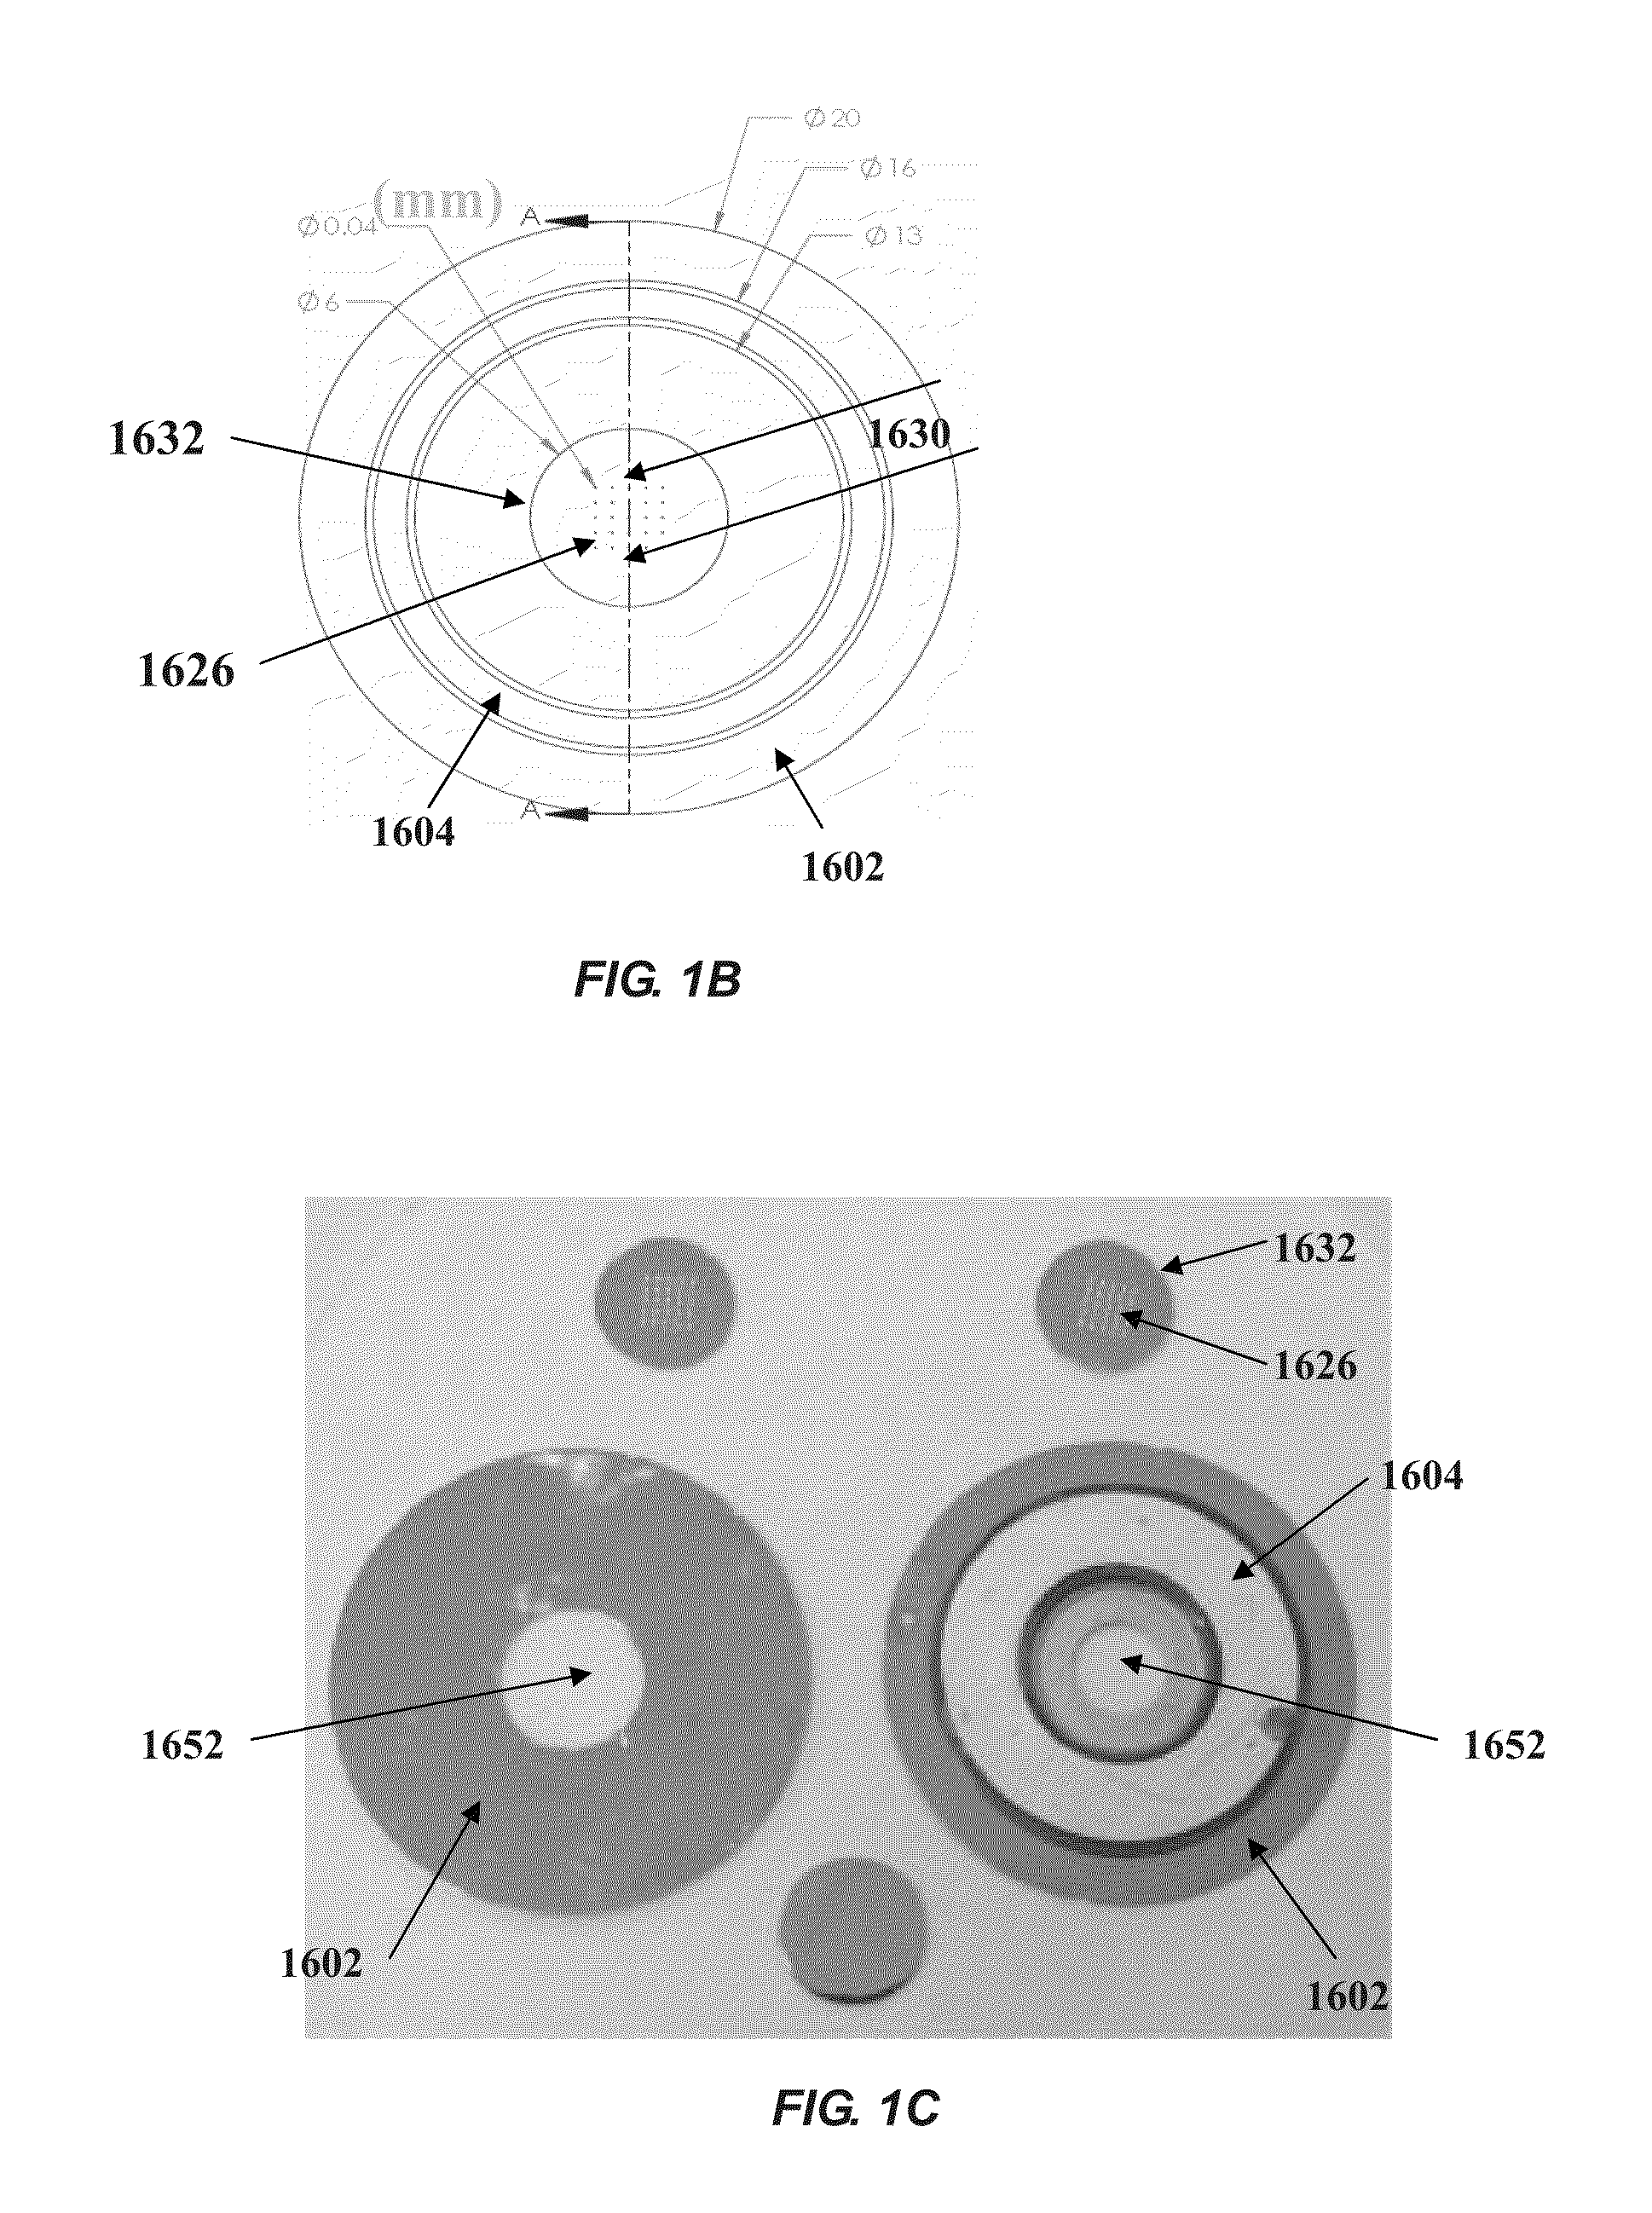 High modulus polymeric ejector mechanism, ejector device, and methods of use